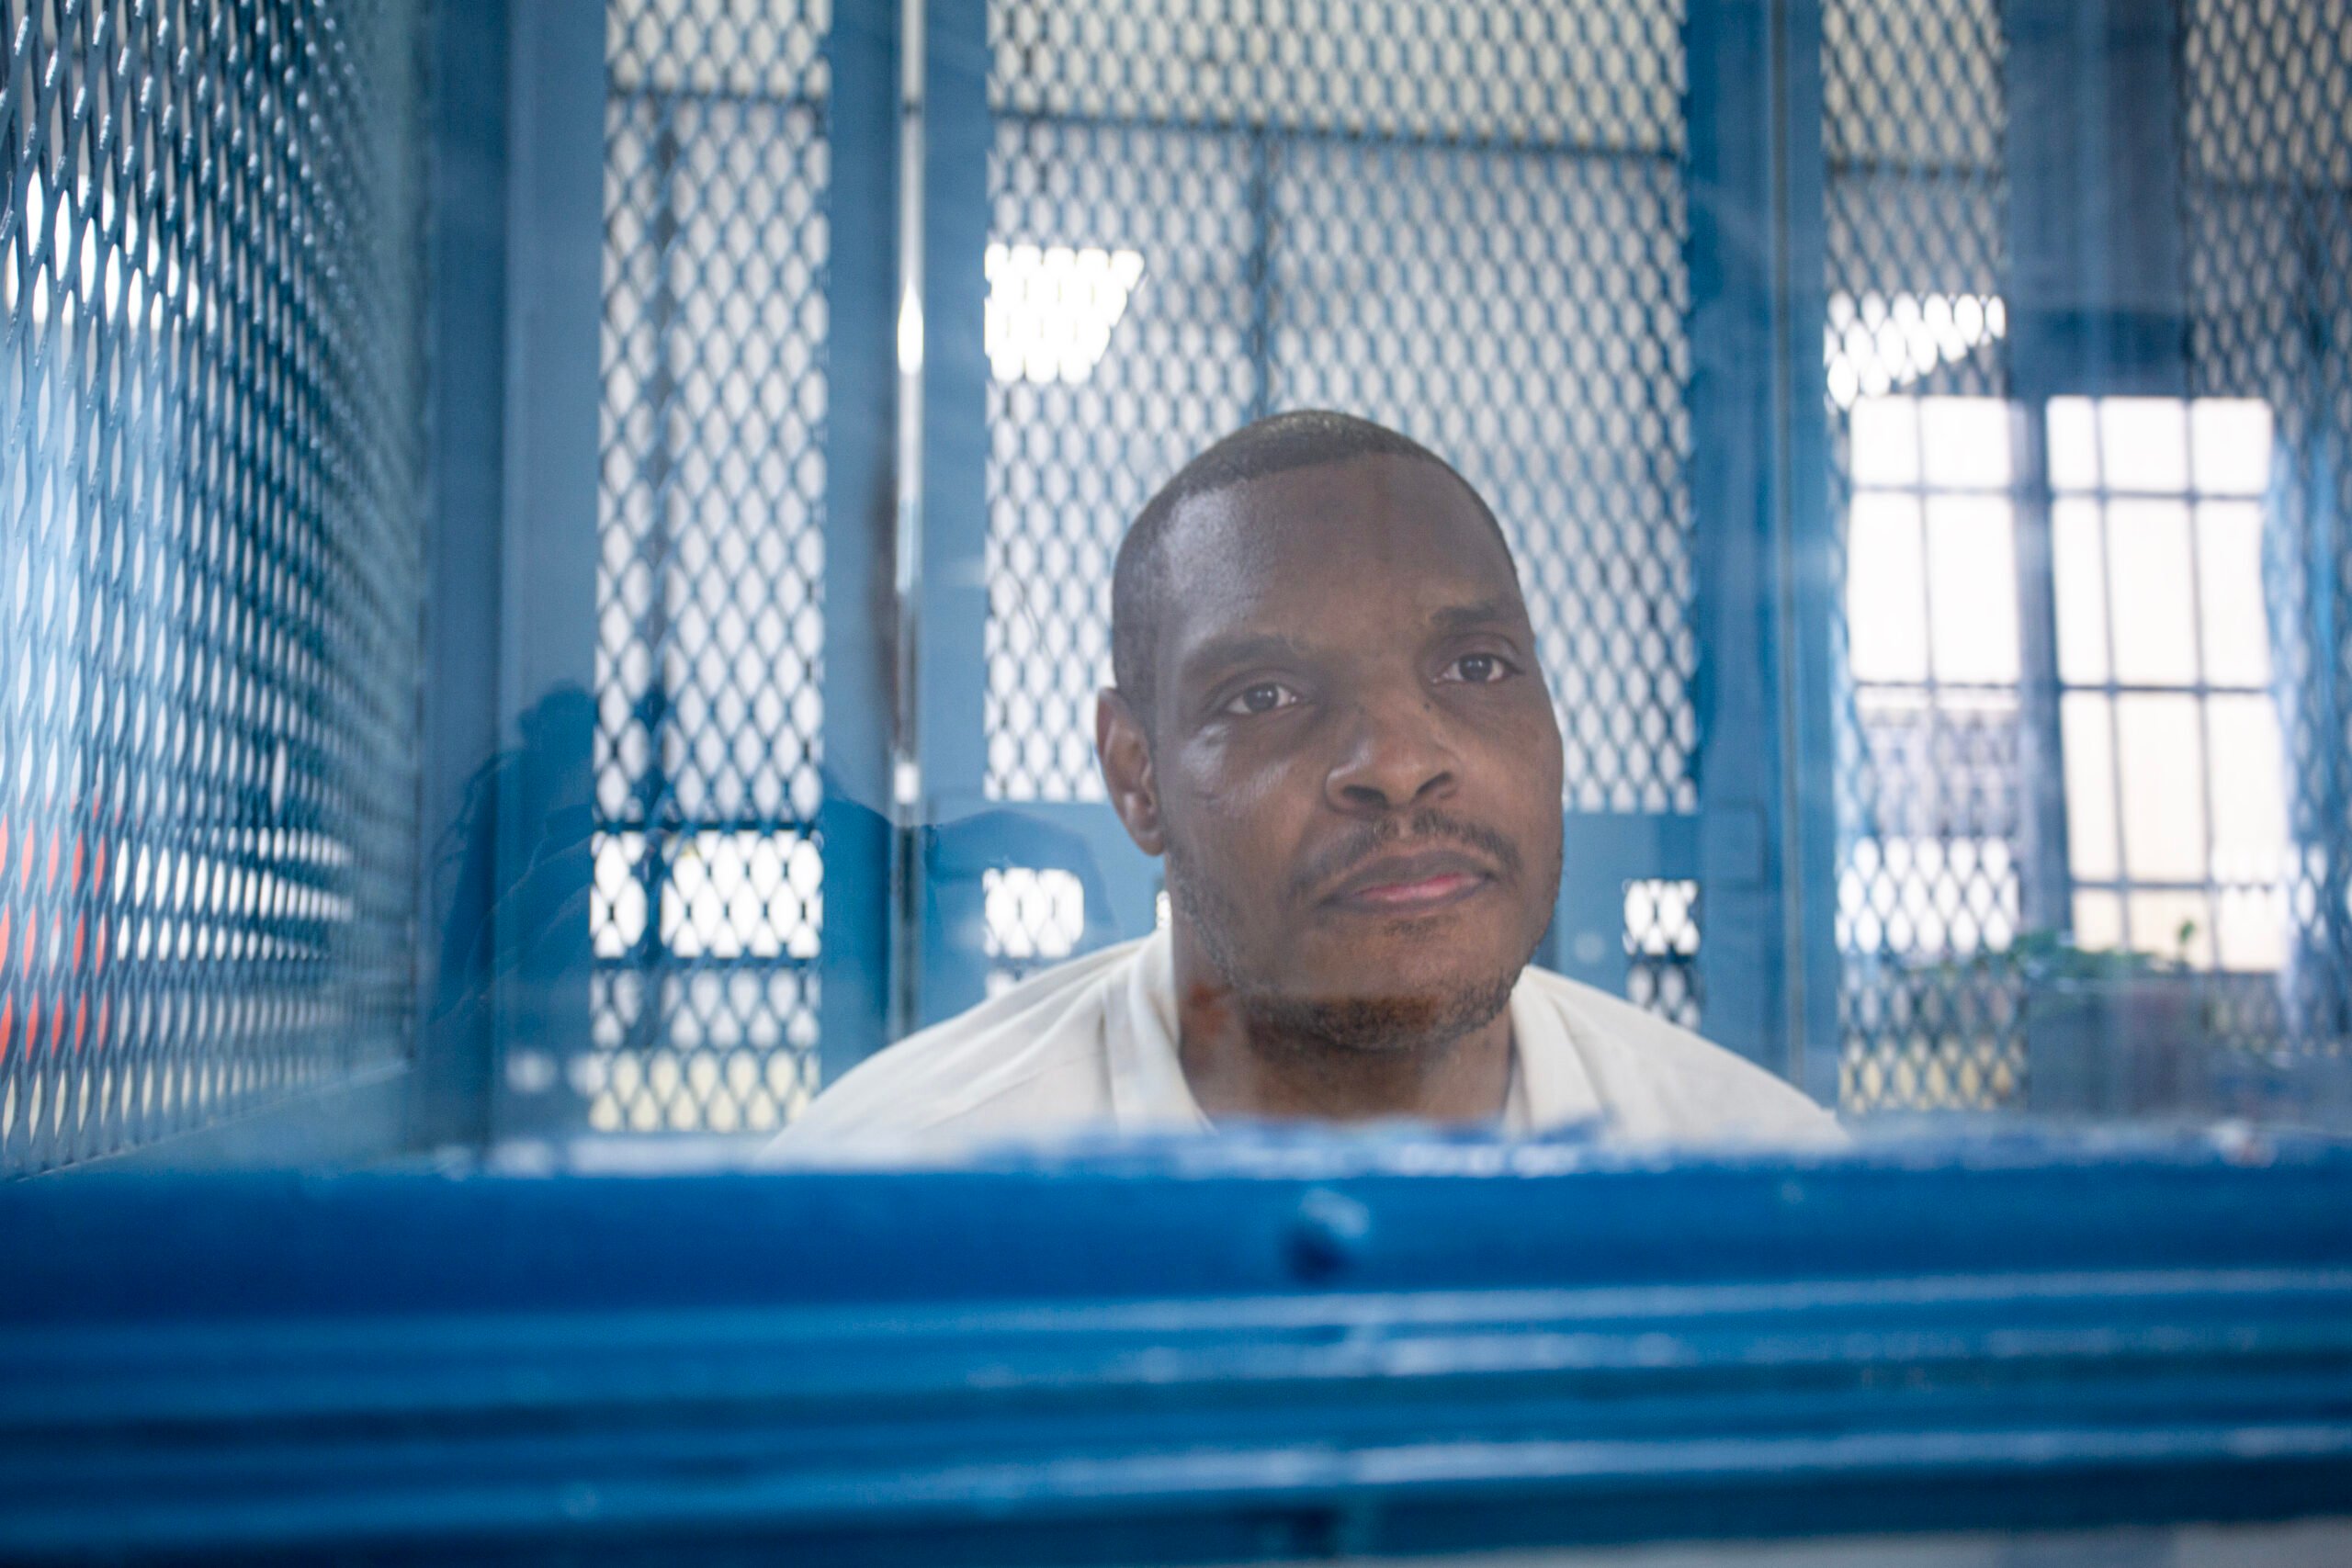 Prison journalist Jason Walker, a Black man with short hair and a short mustache. He has a serious expression on his face and is wearing a collared prison shirt, sitting behind a visitation window in this photograph.